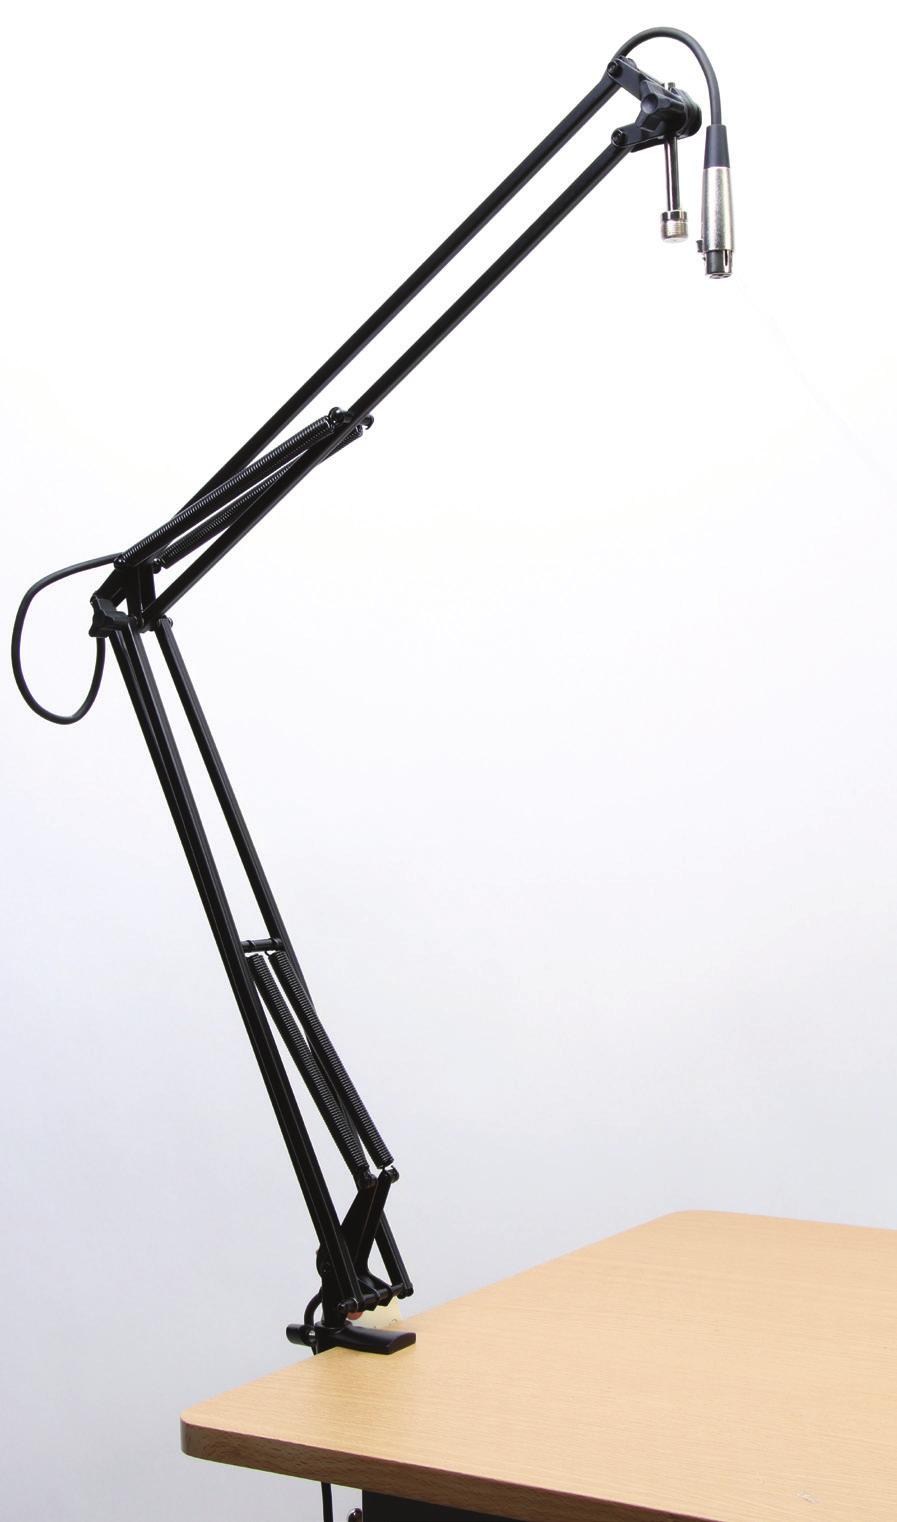 5"- 38" C-clamp Mount: Zinc-cast Cable: 10' XLR (pre-installed in tubing) Premium Broadcast/Webcast Boom Arm MBS7500